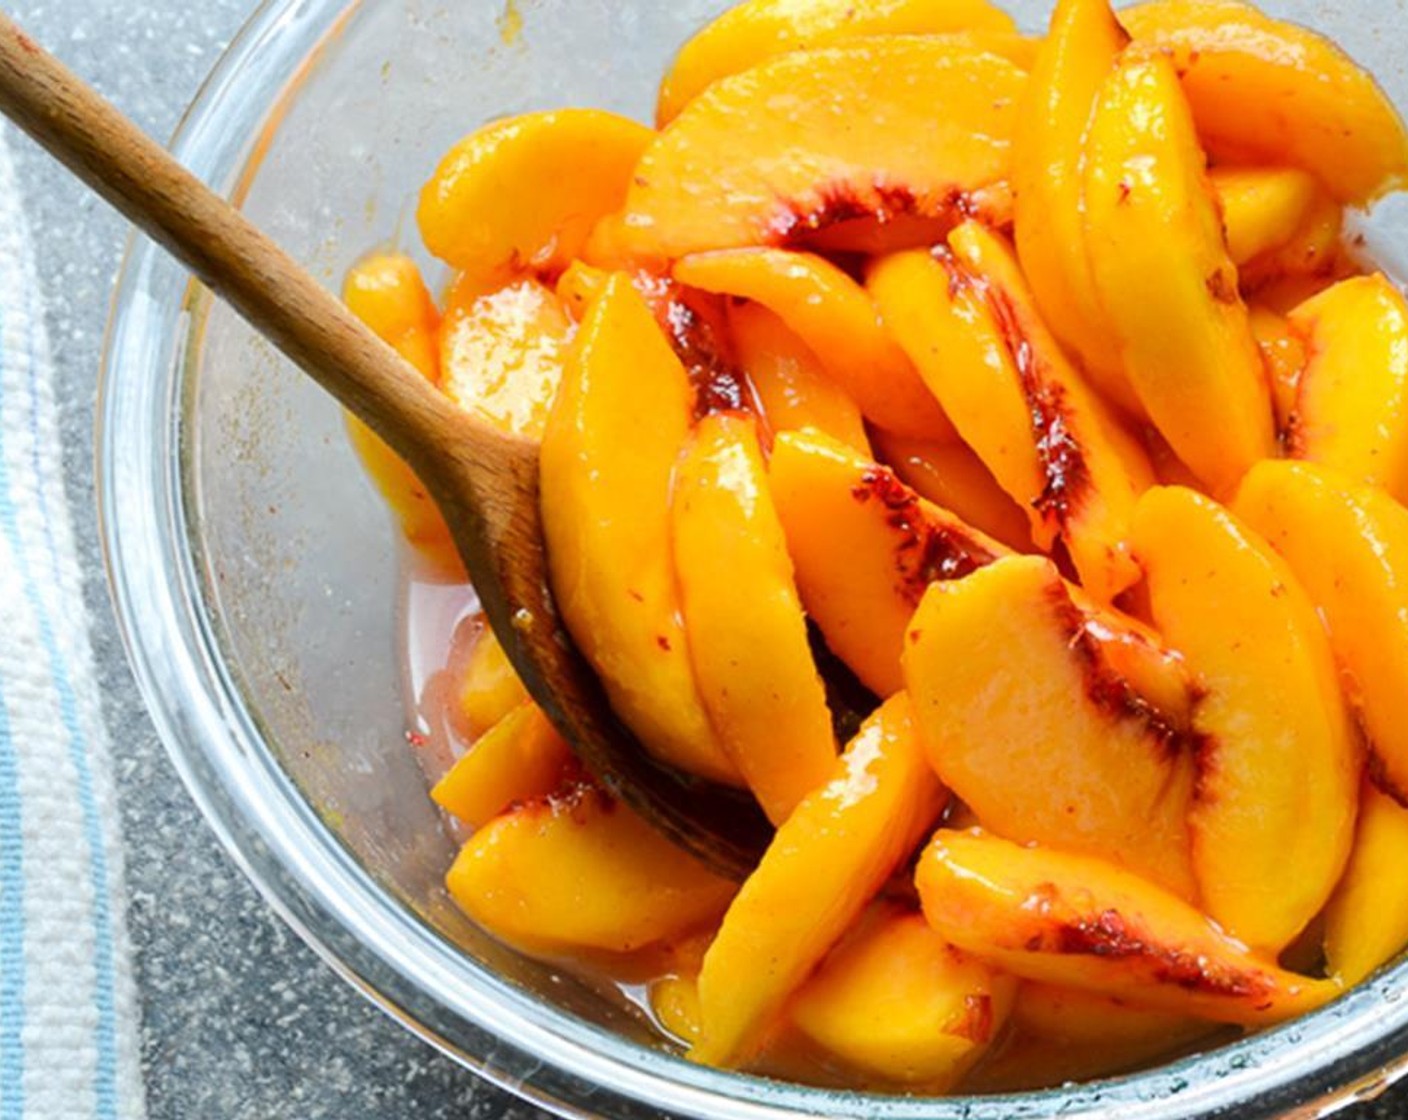 step 7 Add the spice mixture to the peaches, along with the juice from the Lemon (1). Toss until well combined.